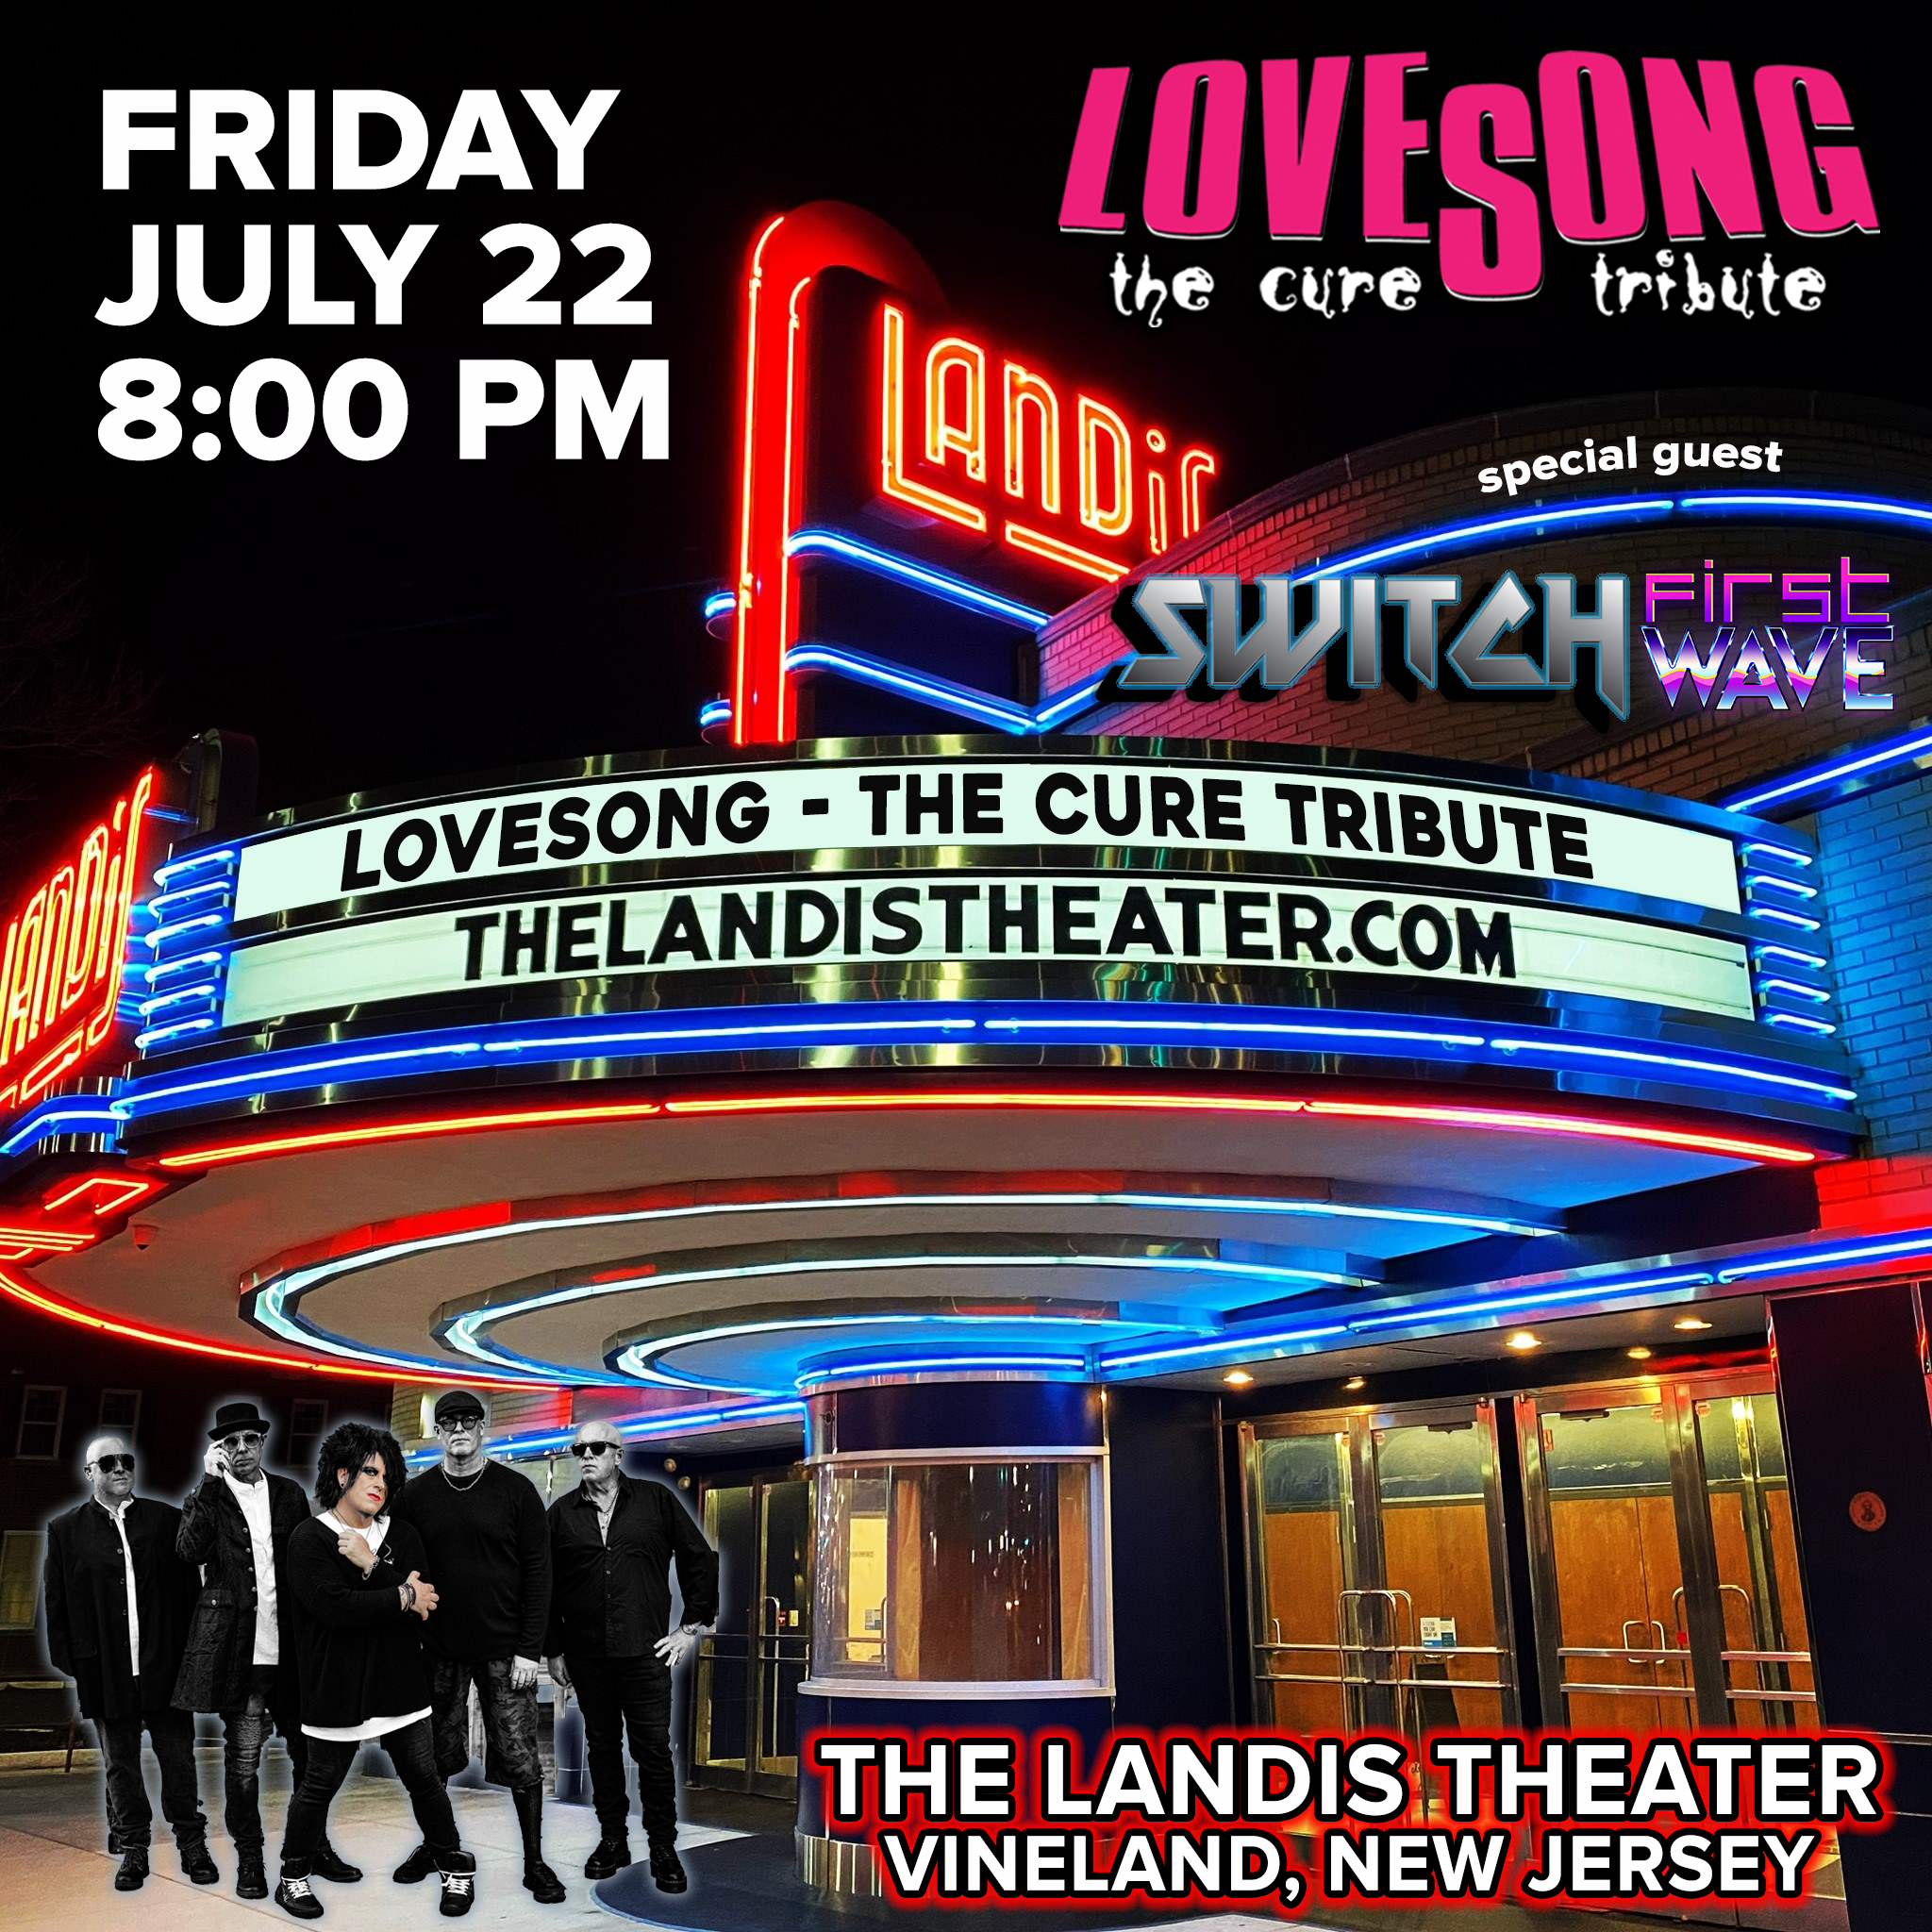 LOVESONG @ The Landis Theater